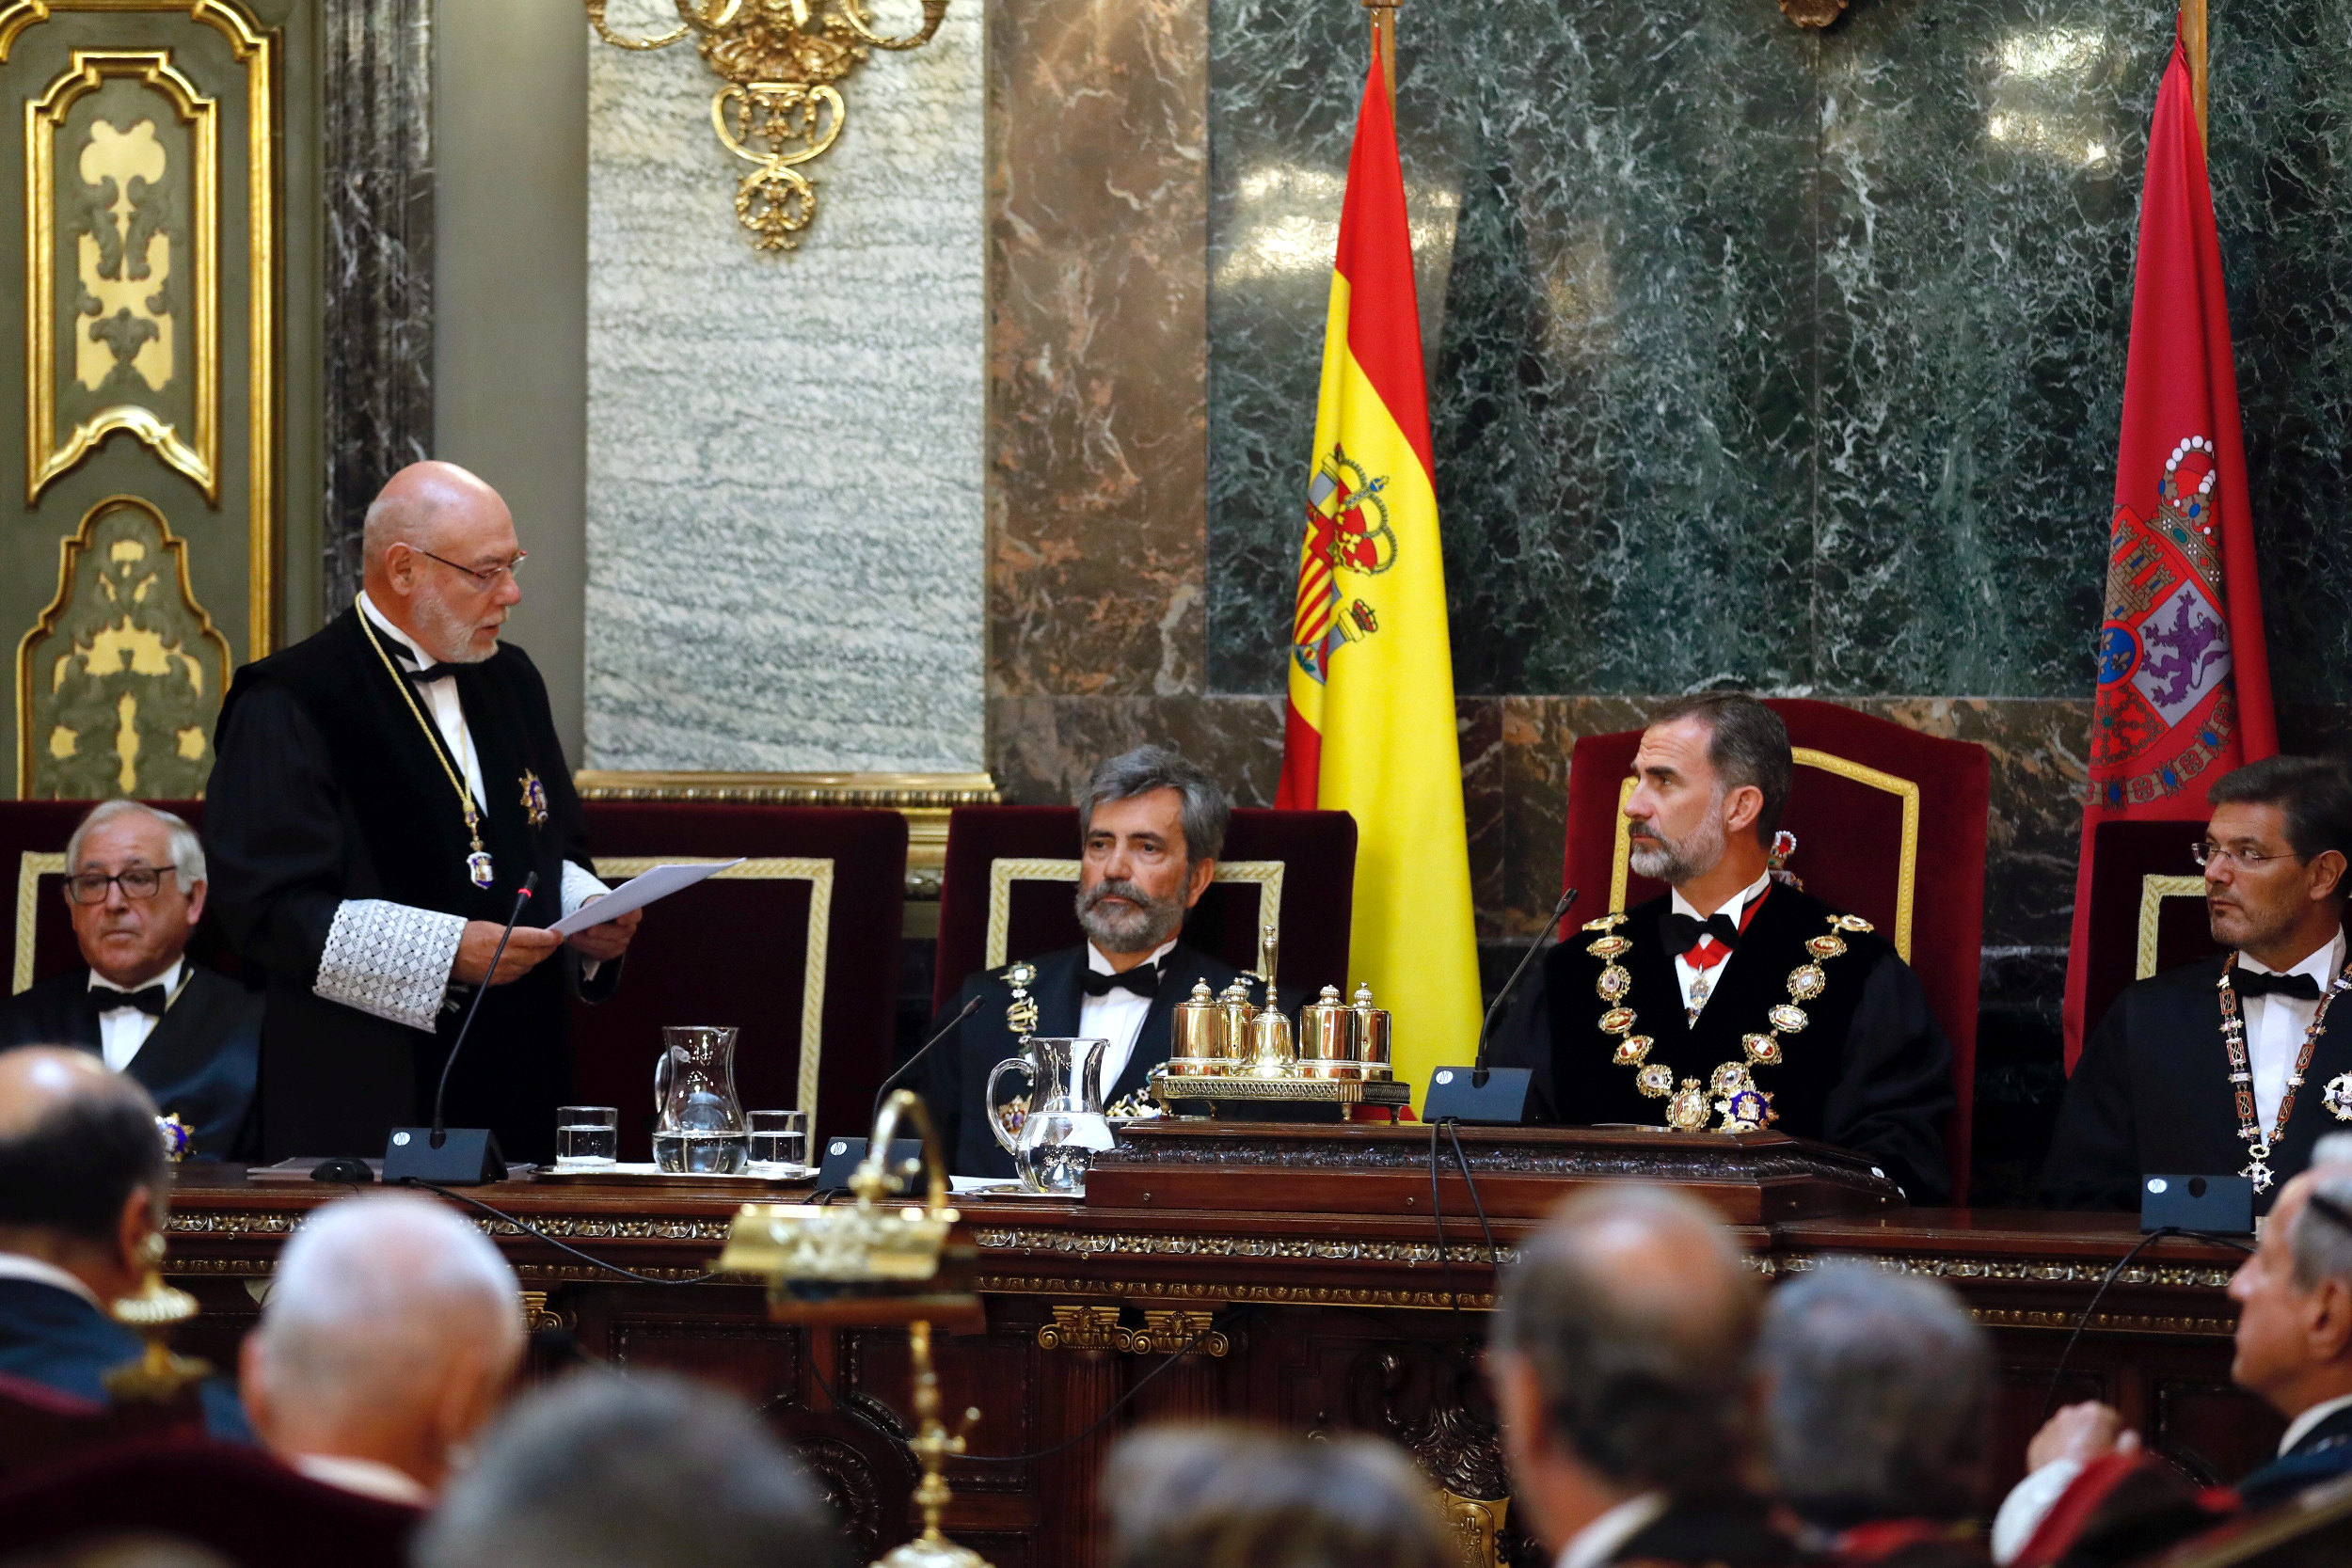 Spain's attorney general vowing to the King of Spain to take any action necessary to stop the referendum